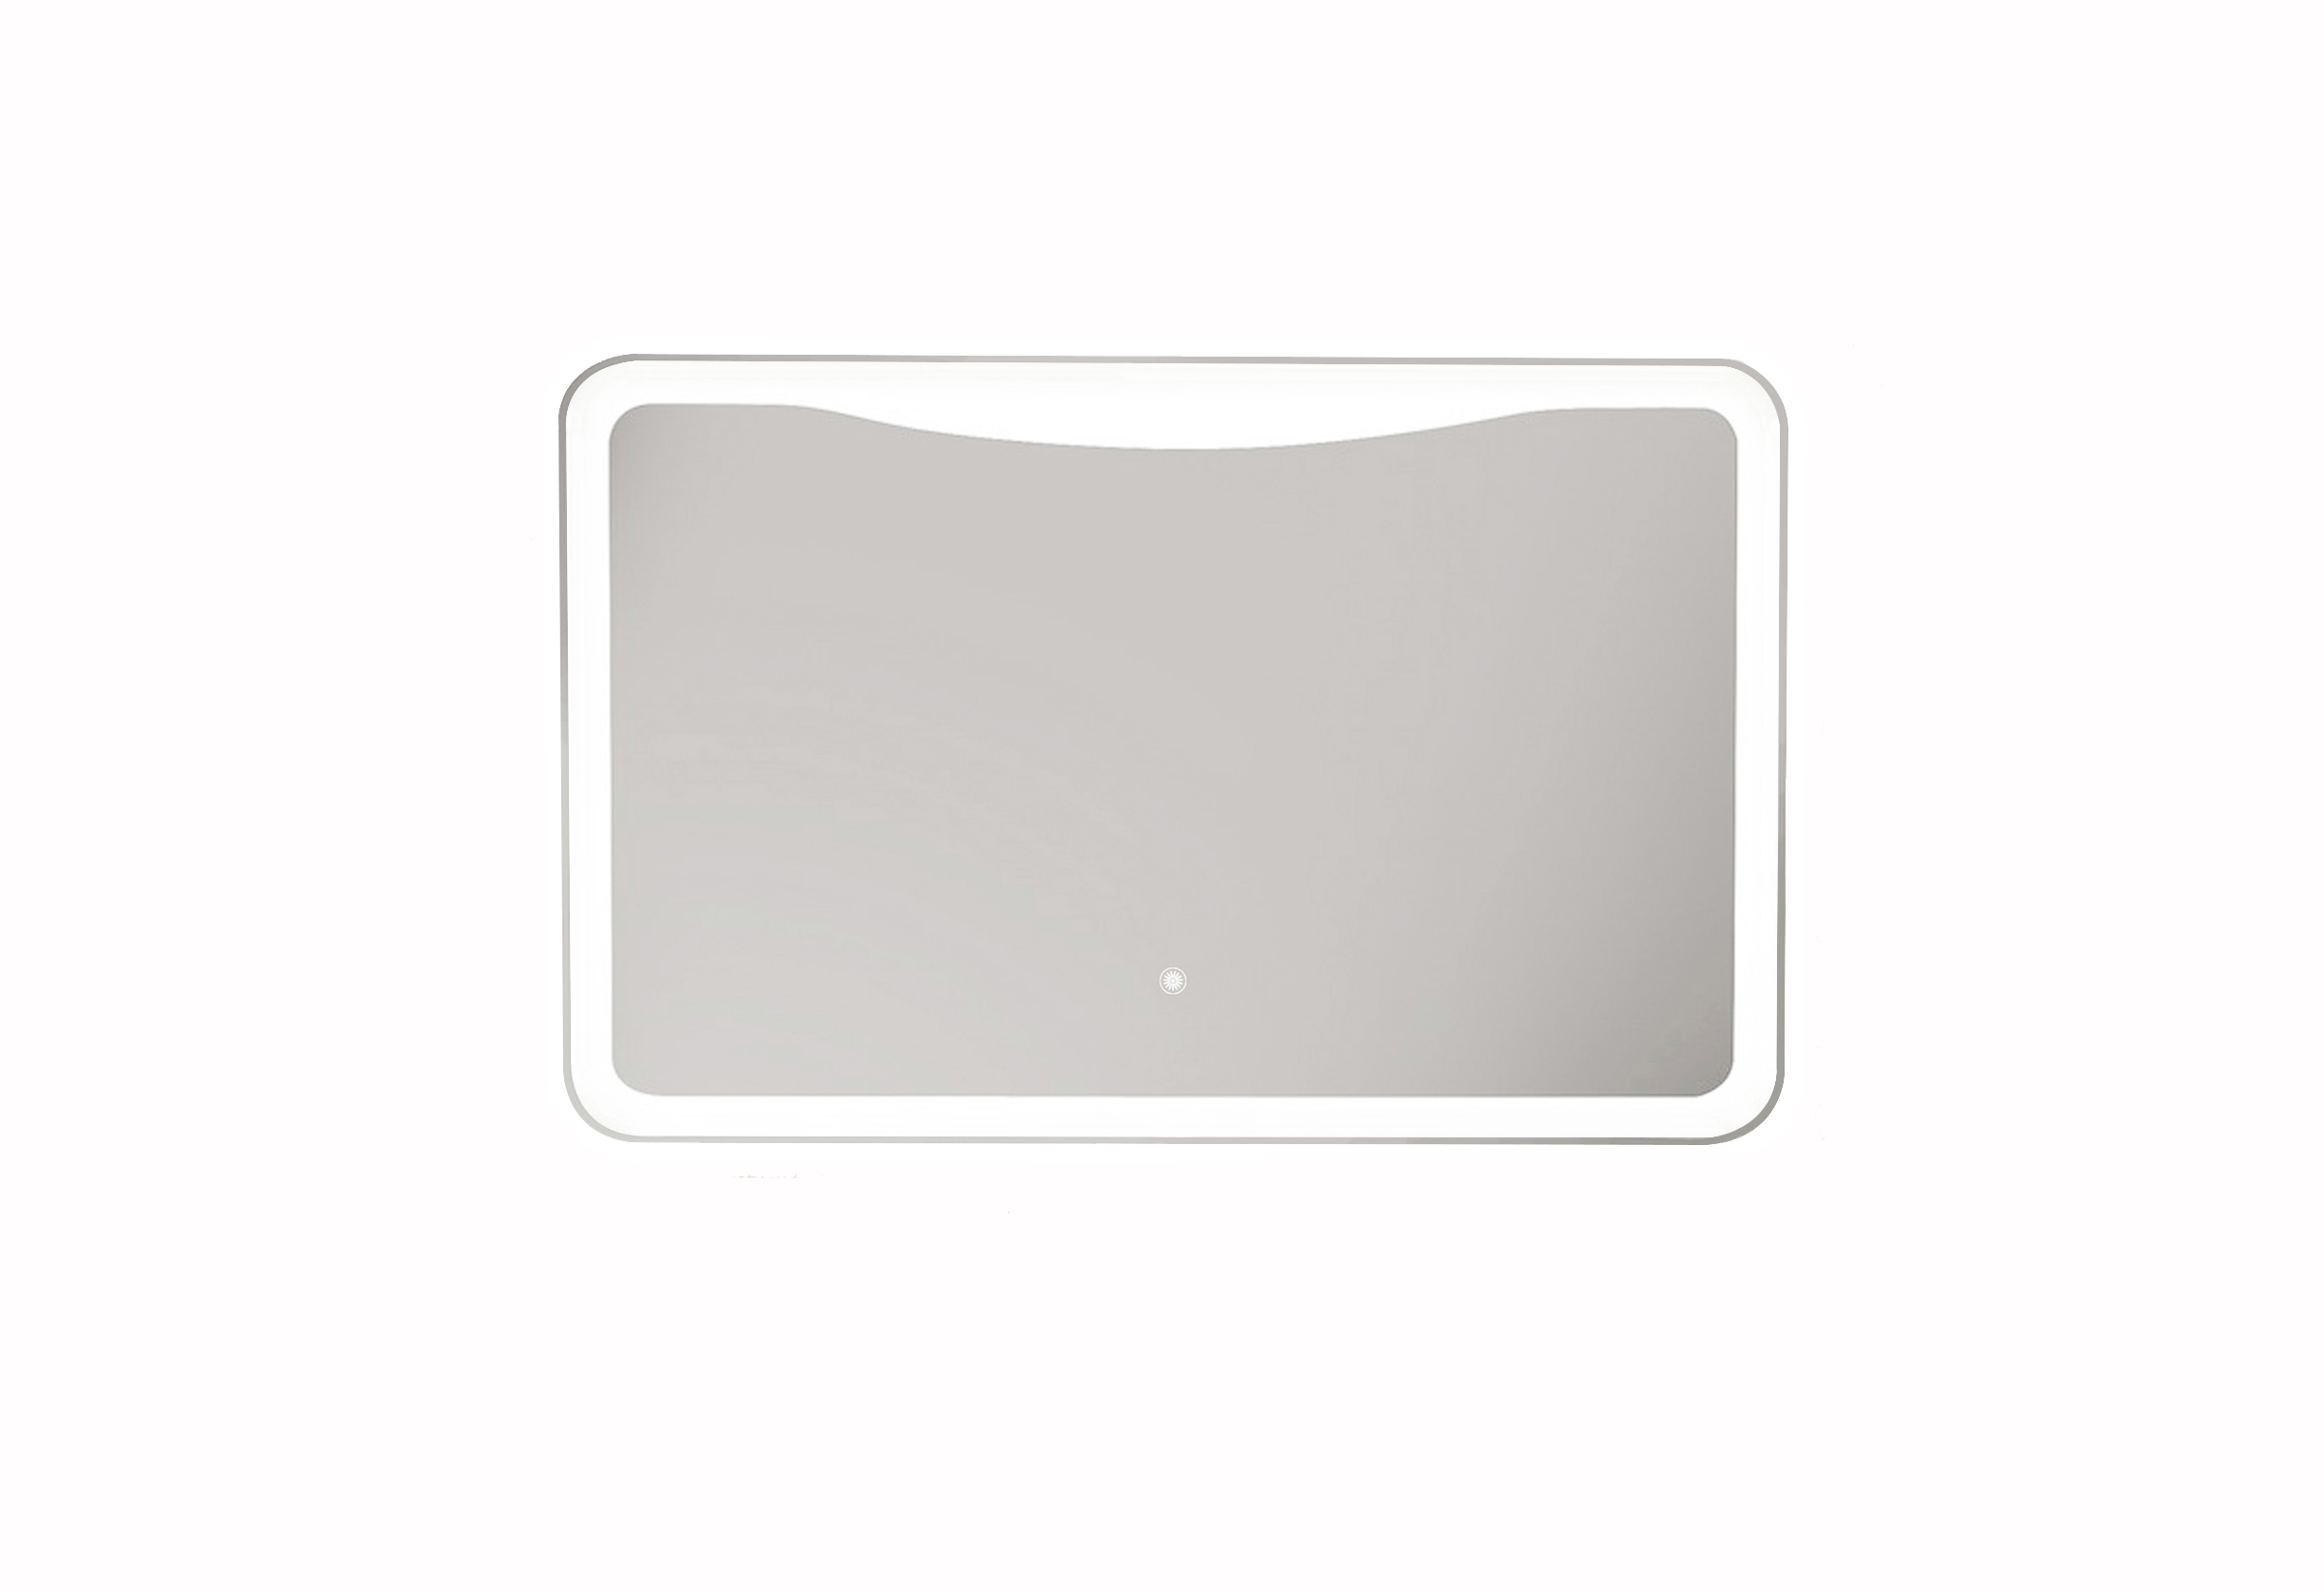 LED-Backlit Contemporary Mirror 47.24x27.56" w/Touch Sensor